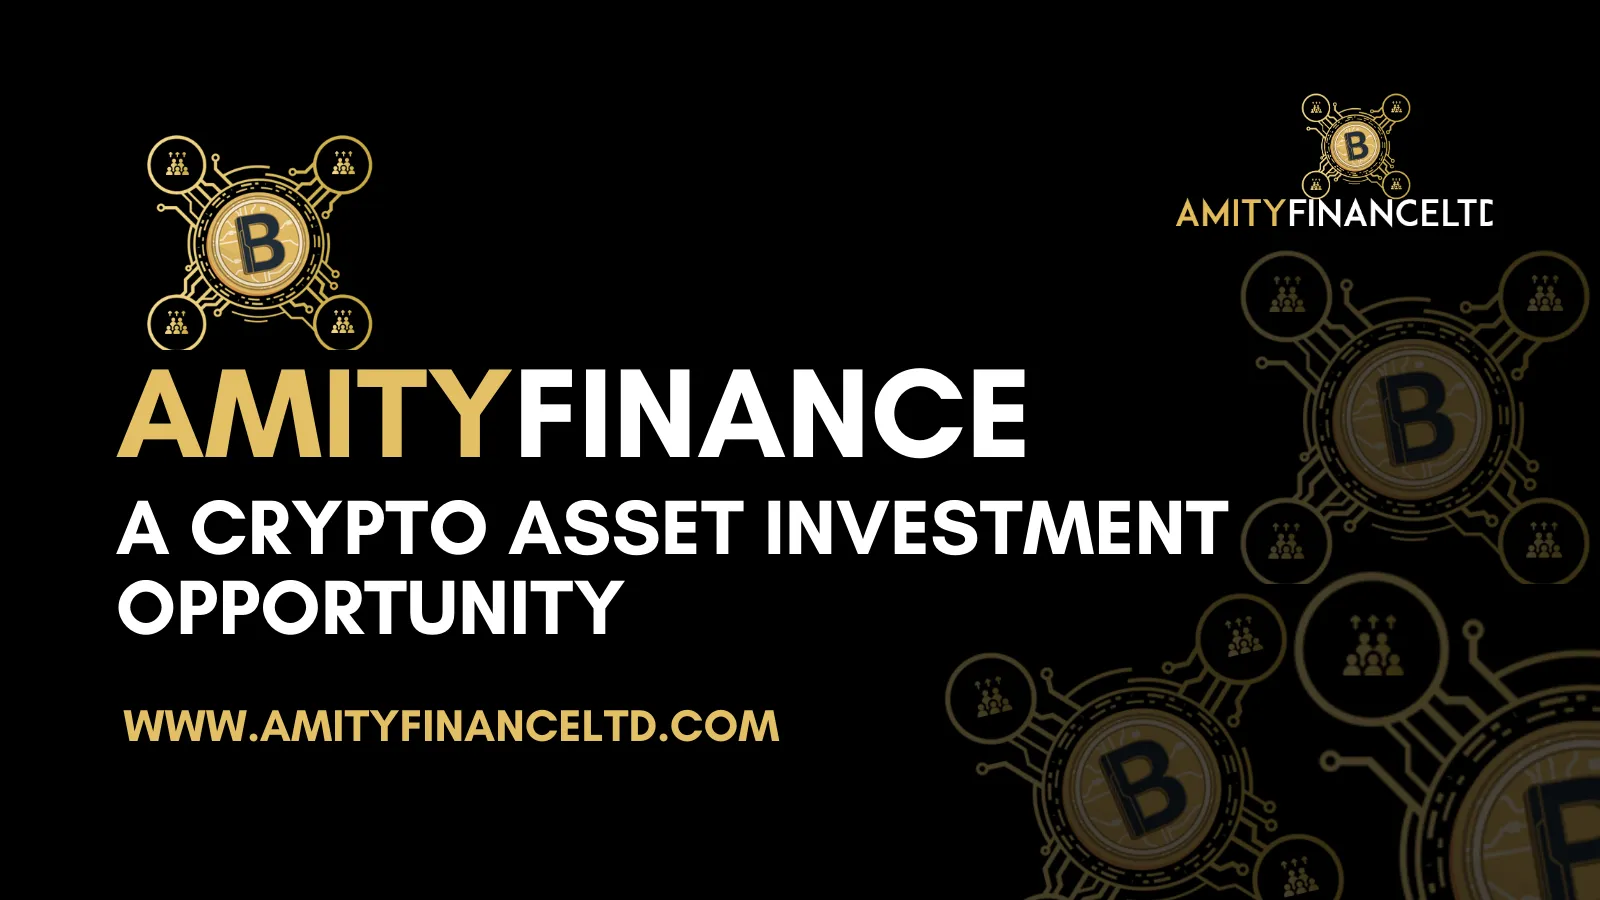 Introducing AmityFinanceLtd — A Crypto Asset Investment Opportunity